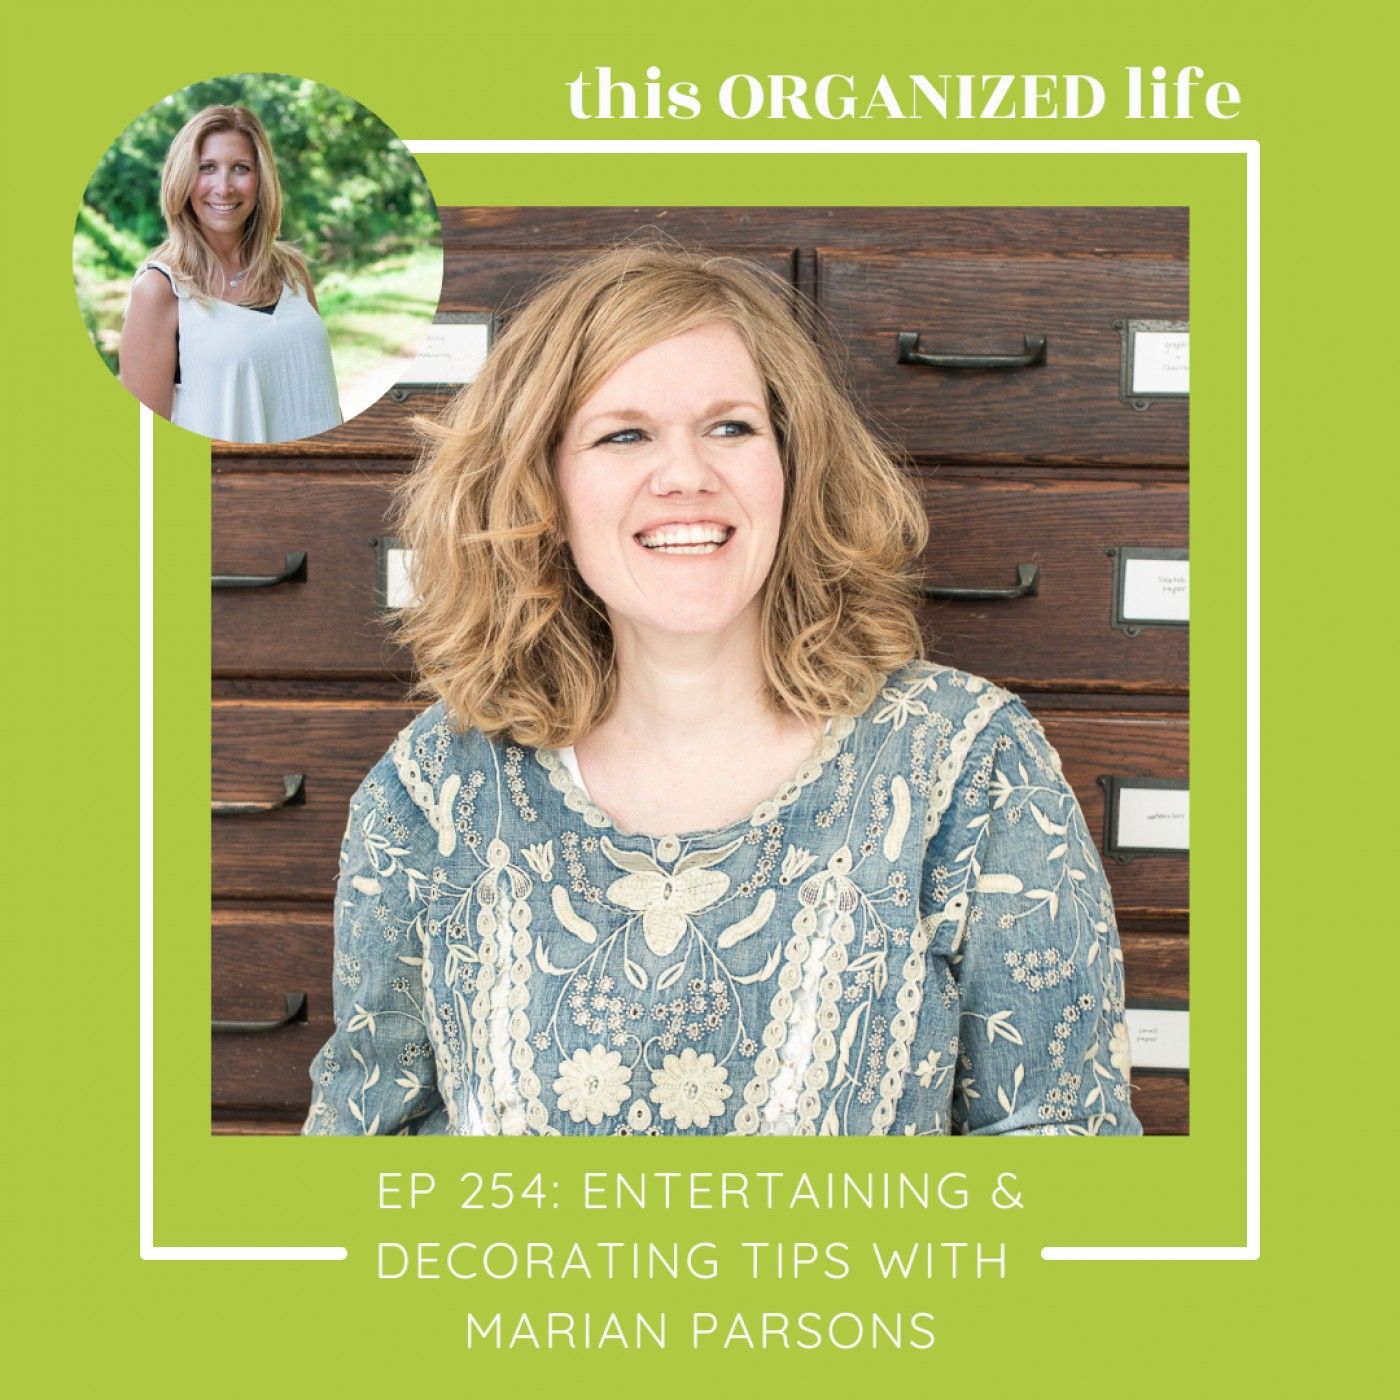 ep 254: Entertaining & Decorating Tips with Marian Parsons